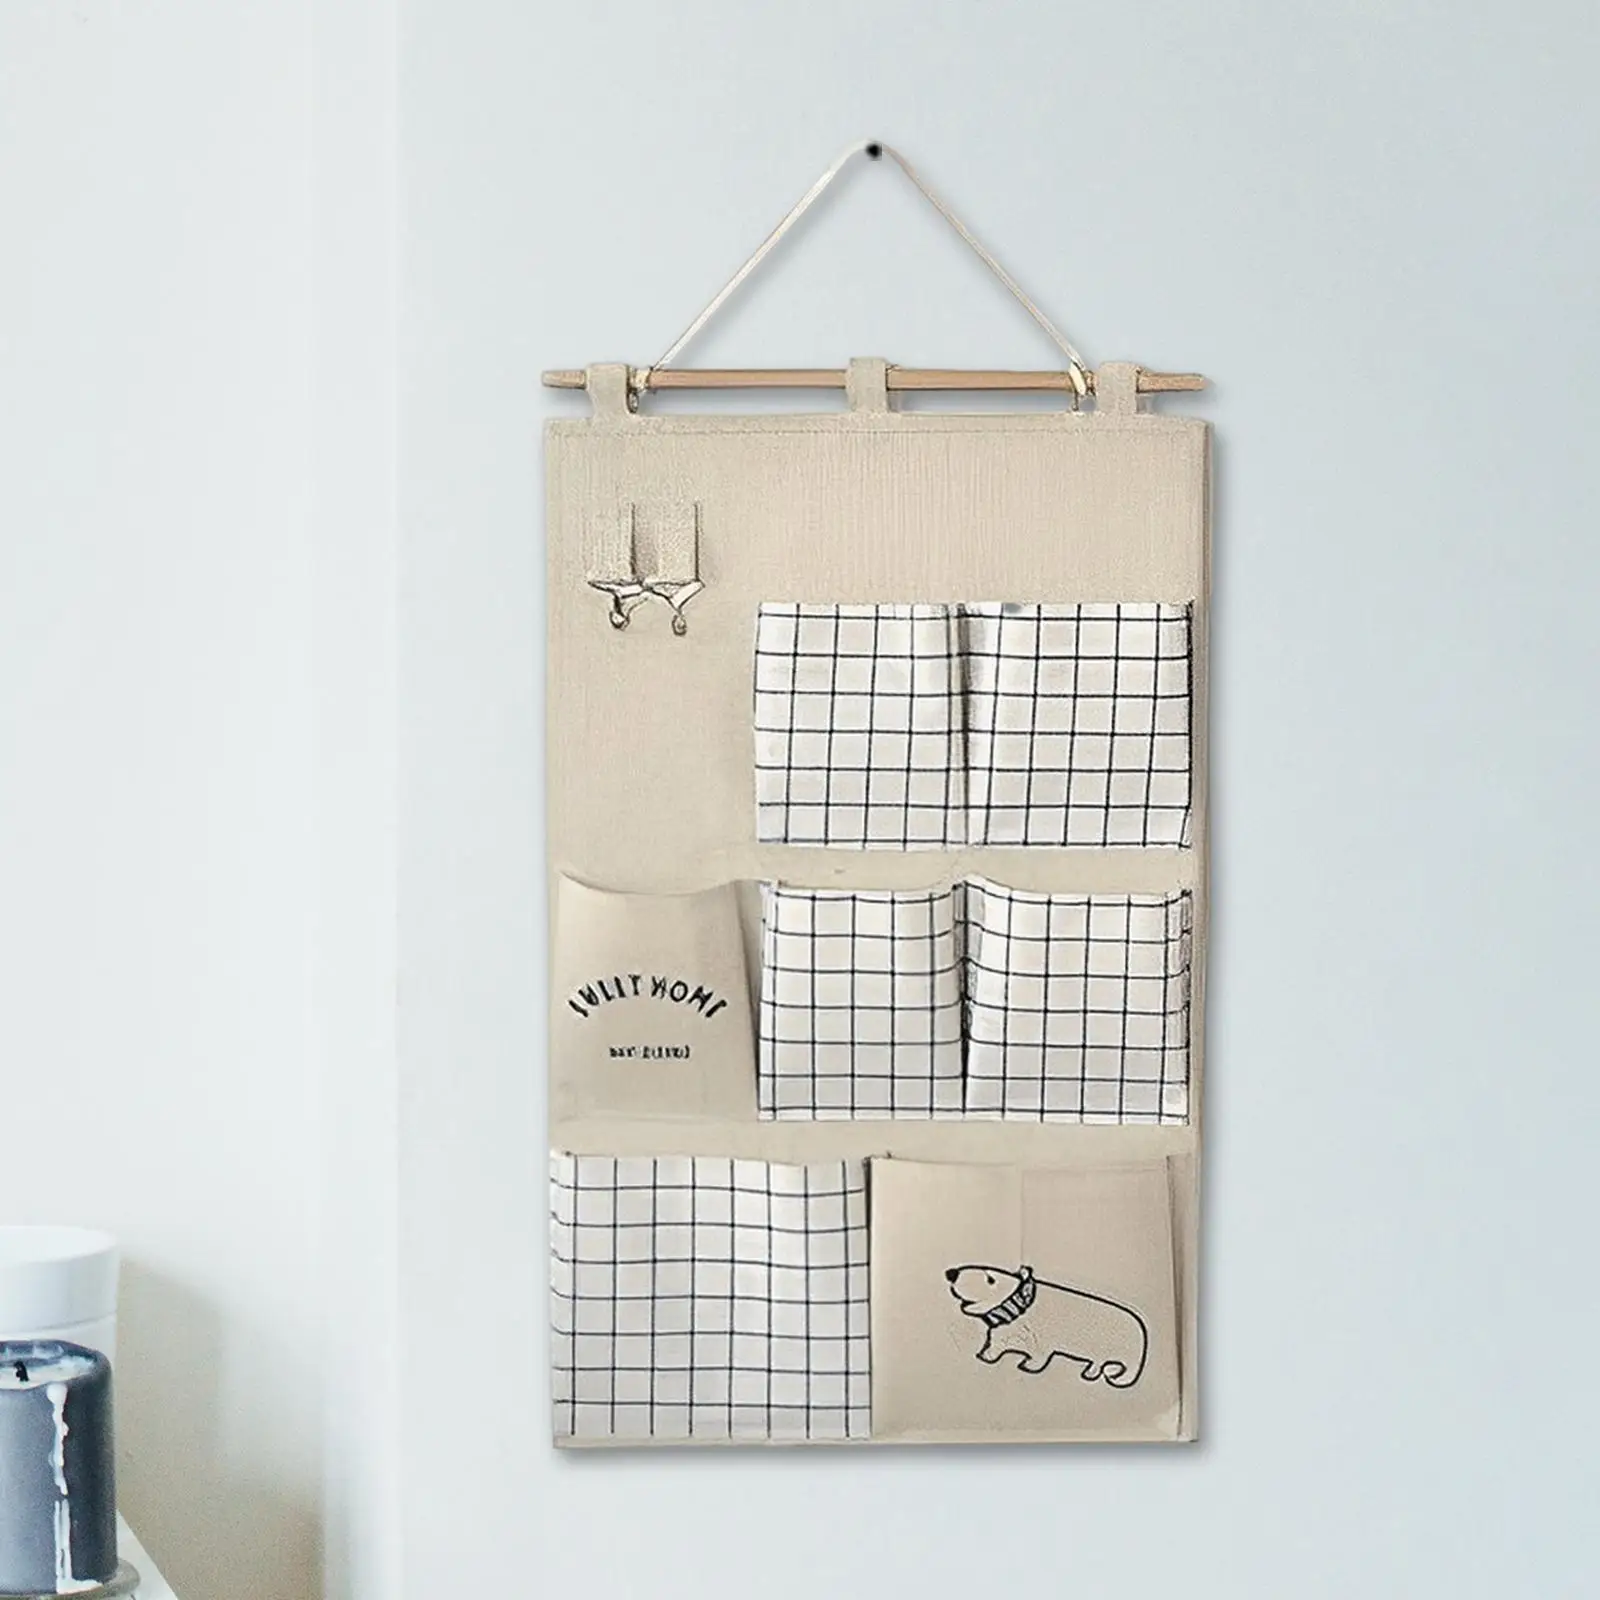 Wall Closet Hanging Bag Organizer Space Saving Large with Pockets Wall Hanging Storage Bag for Pantry Living Room Bedroom Closet